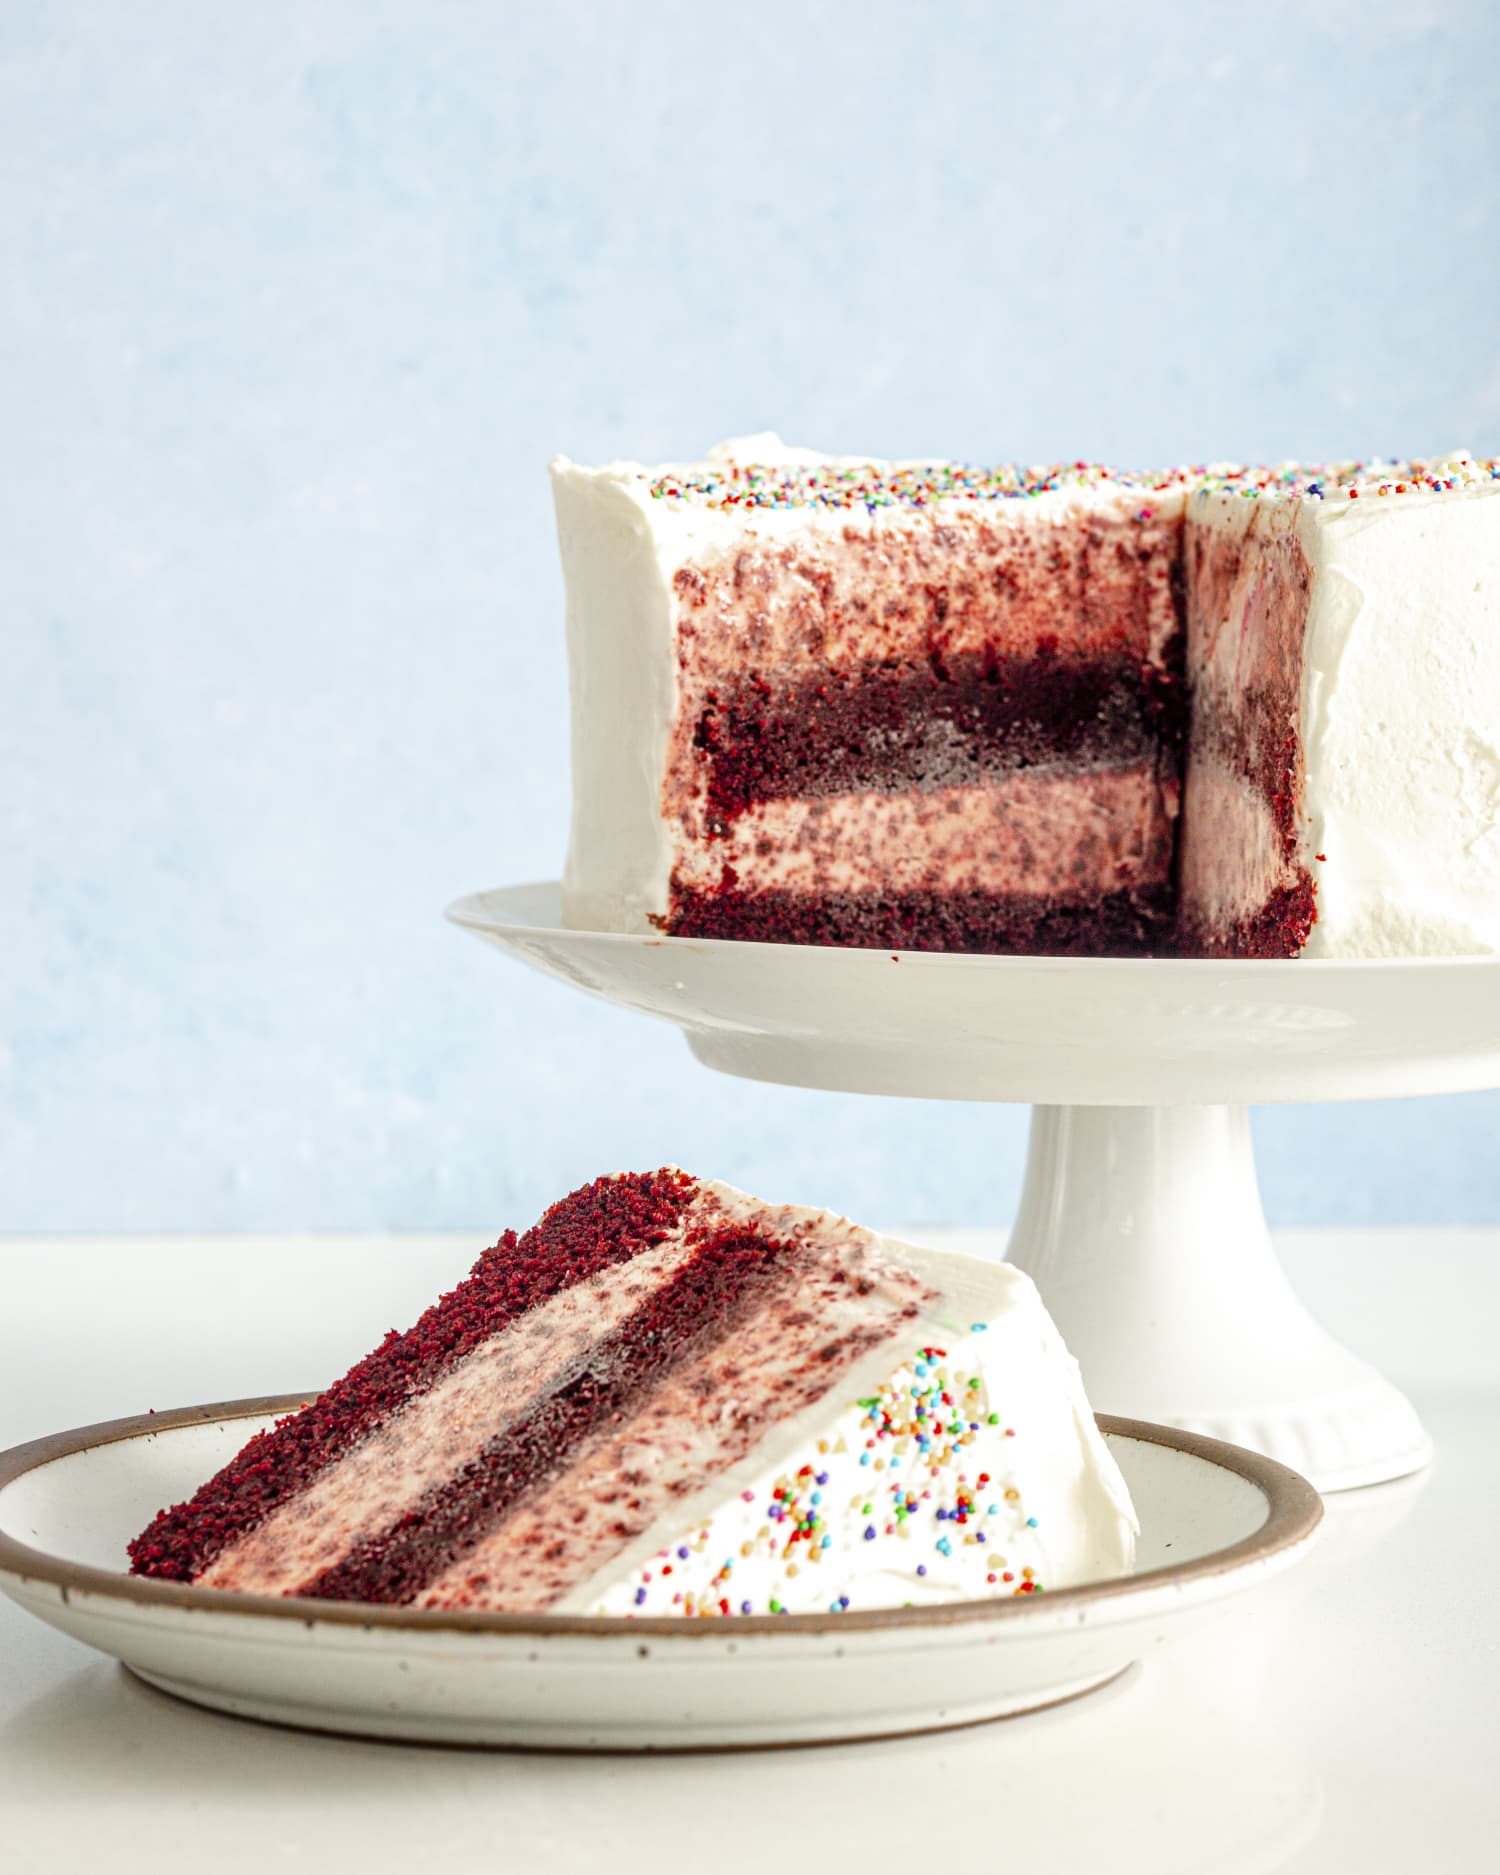 This Red Velvet Ice Cream Cake Is a Showstopper